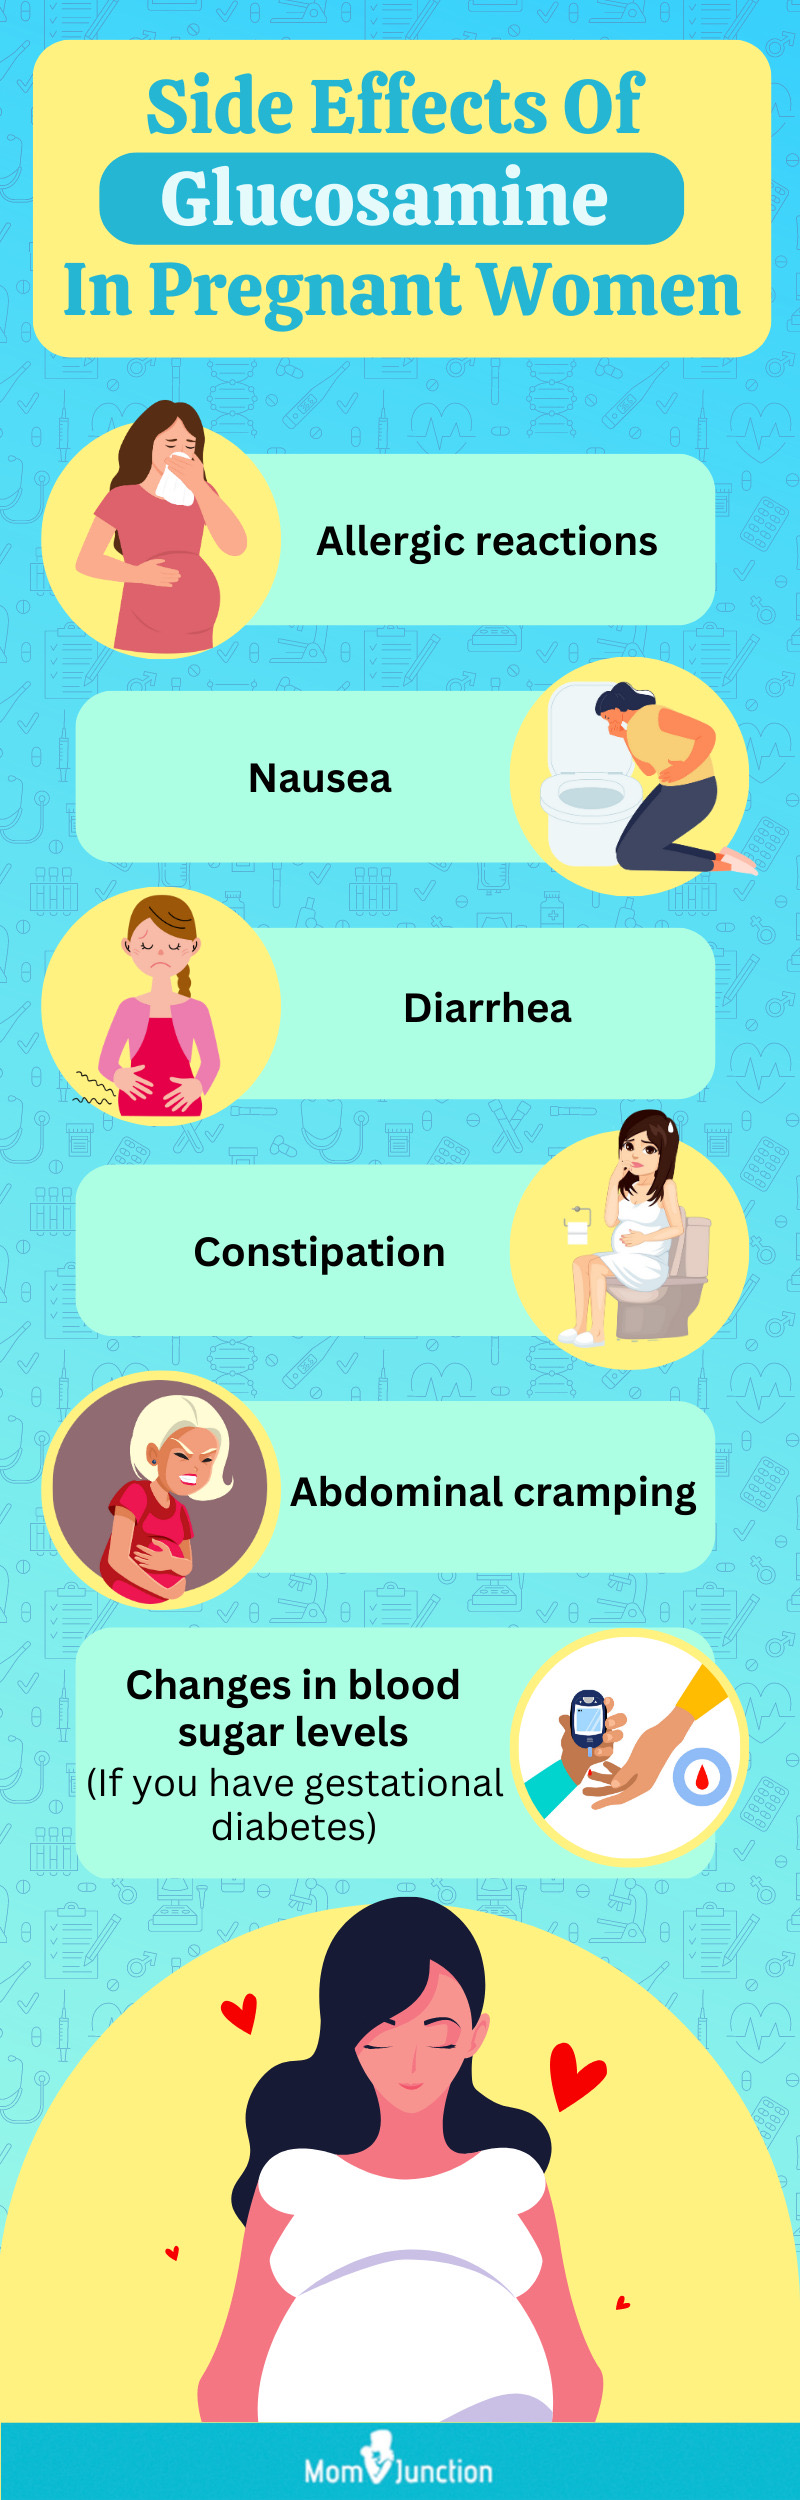 effects of glucosamine during pregnancy (infographic)